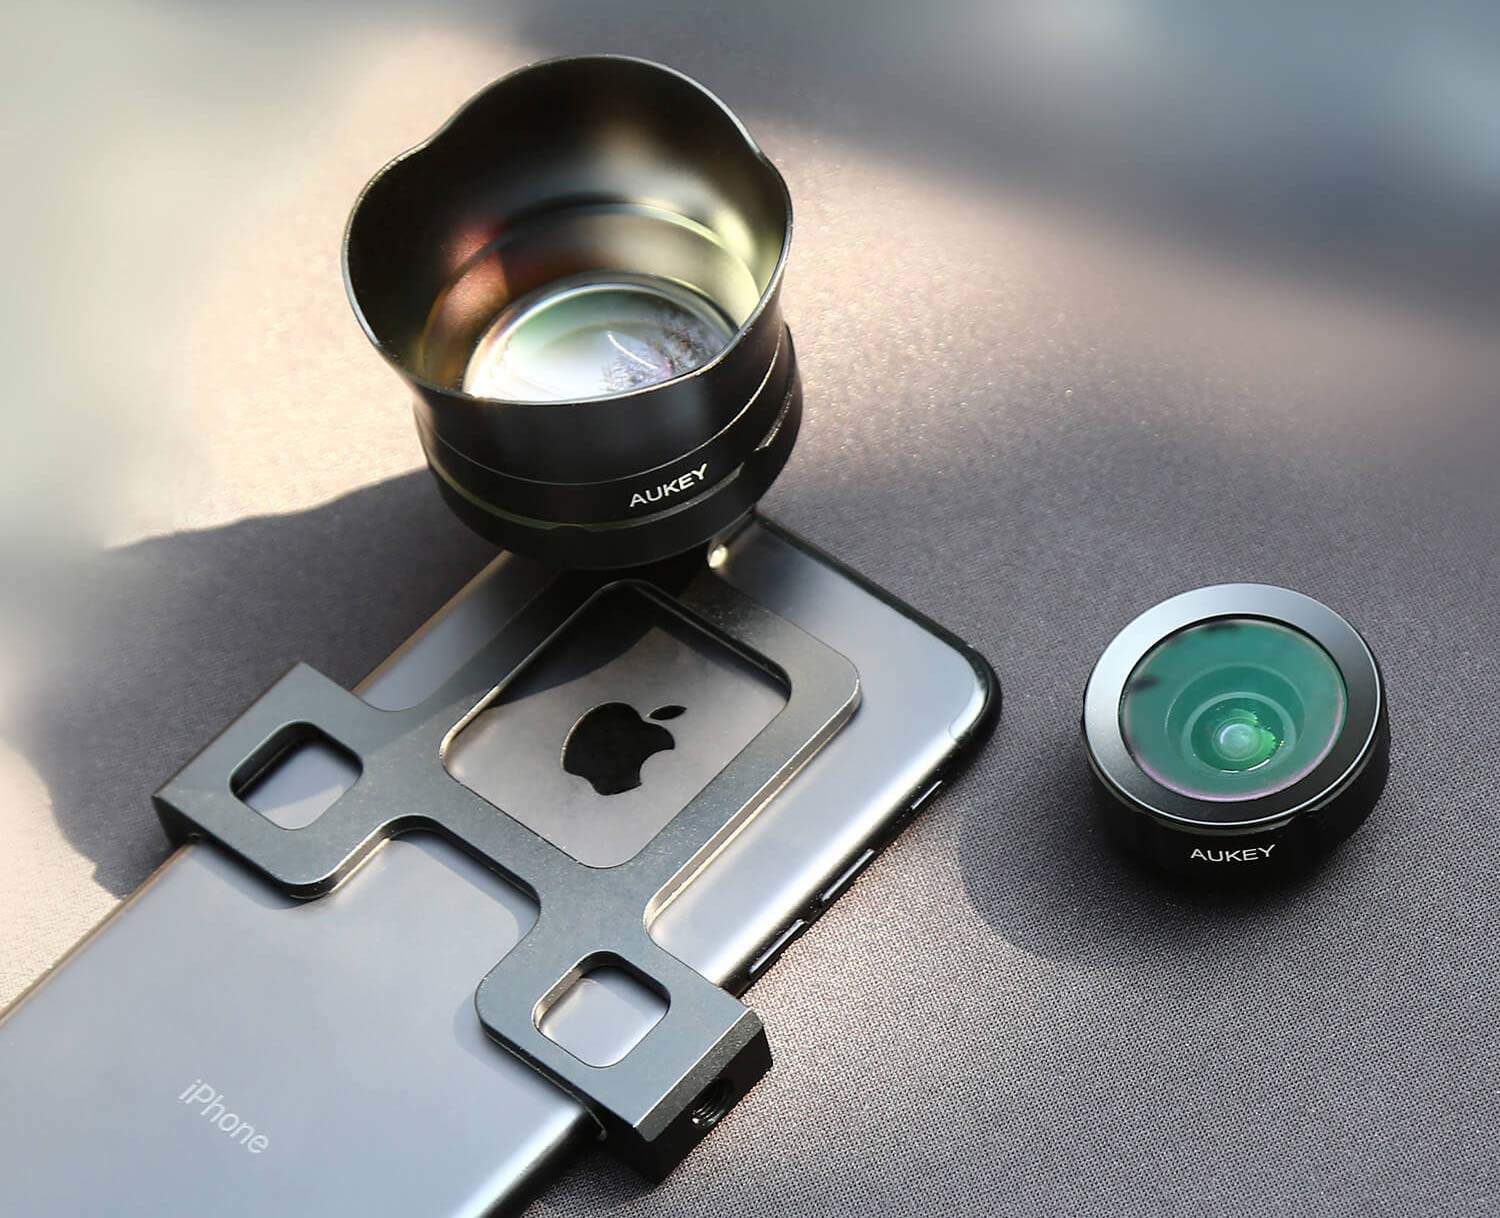 The Aukey PL-A8 Ora lens kit for iPhone 7 features both wide-angle and telephoto lenses.